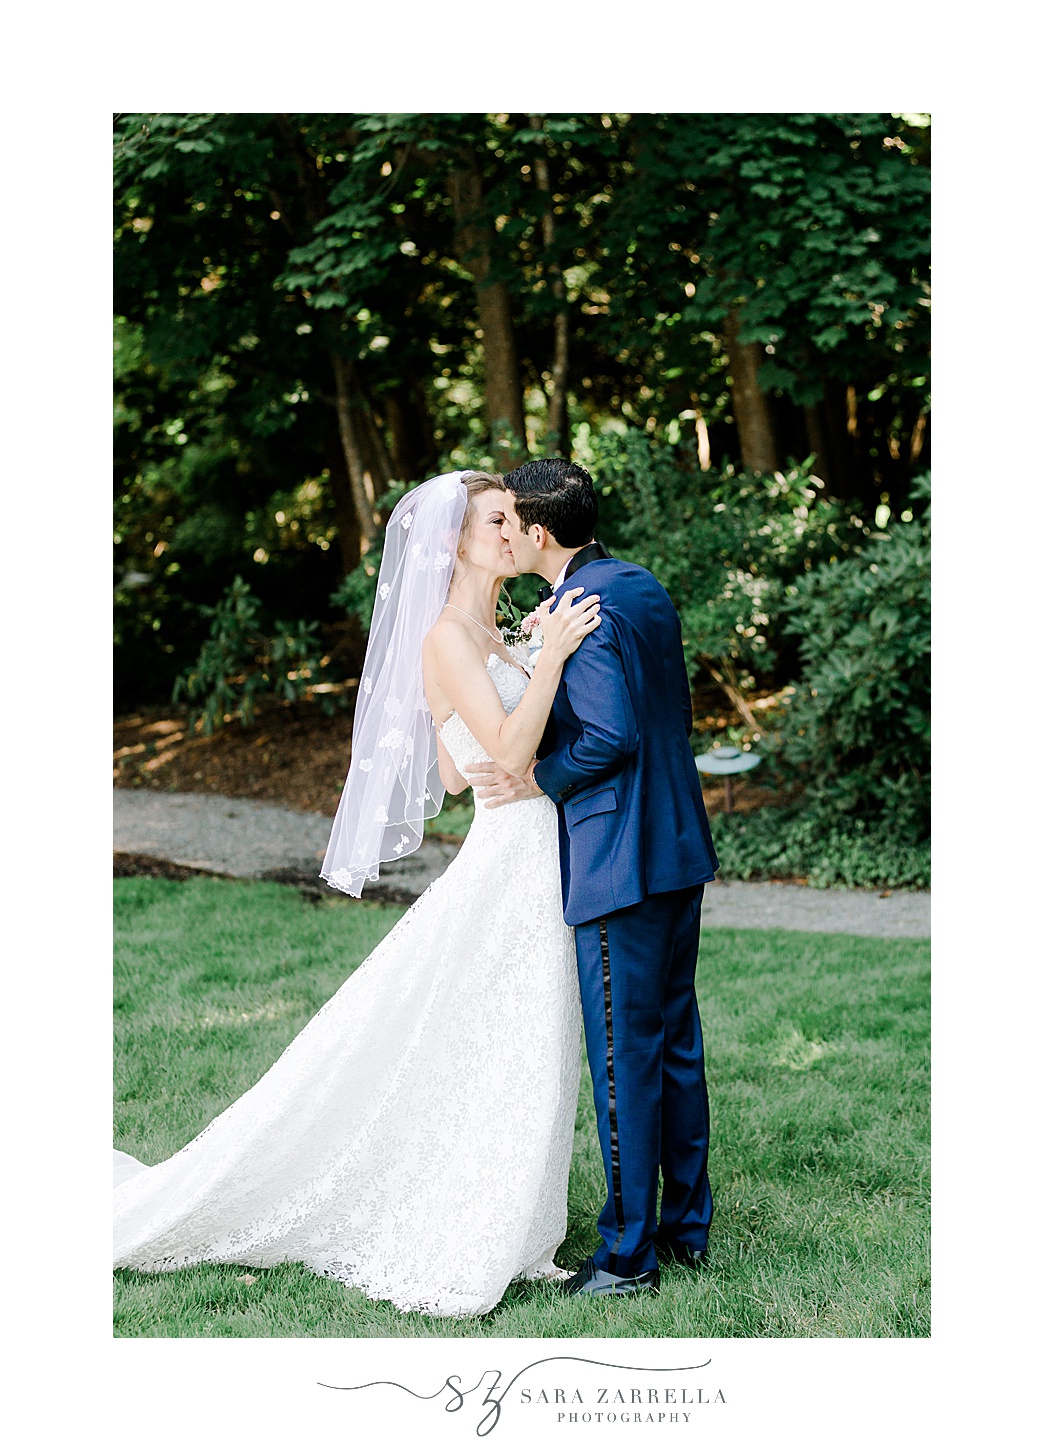 groom kisses bride dipping her slightly on lawn at the Chanler